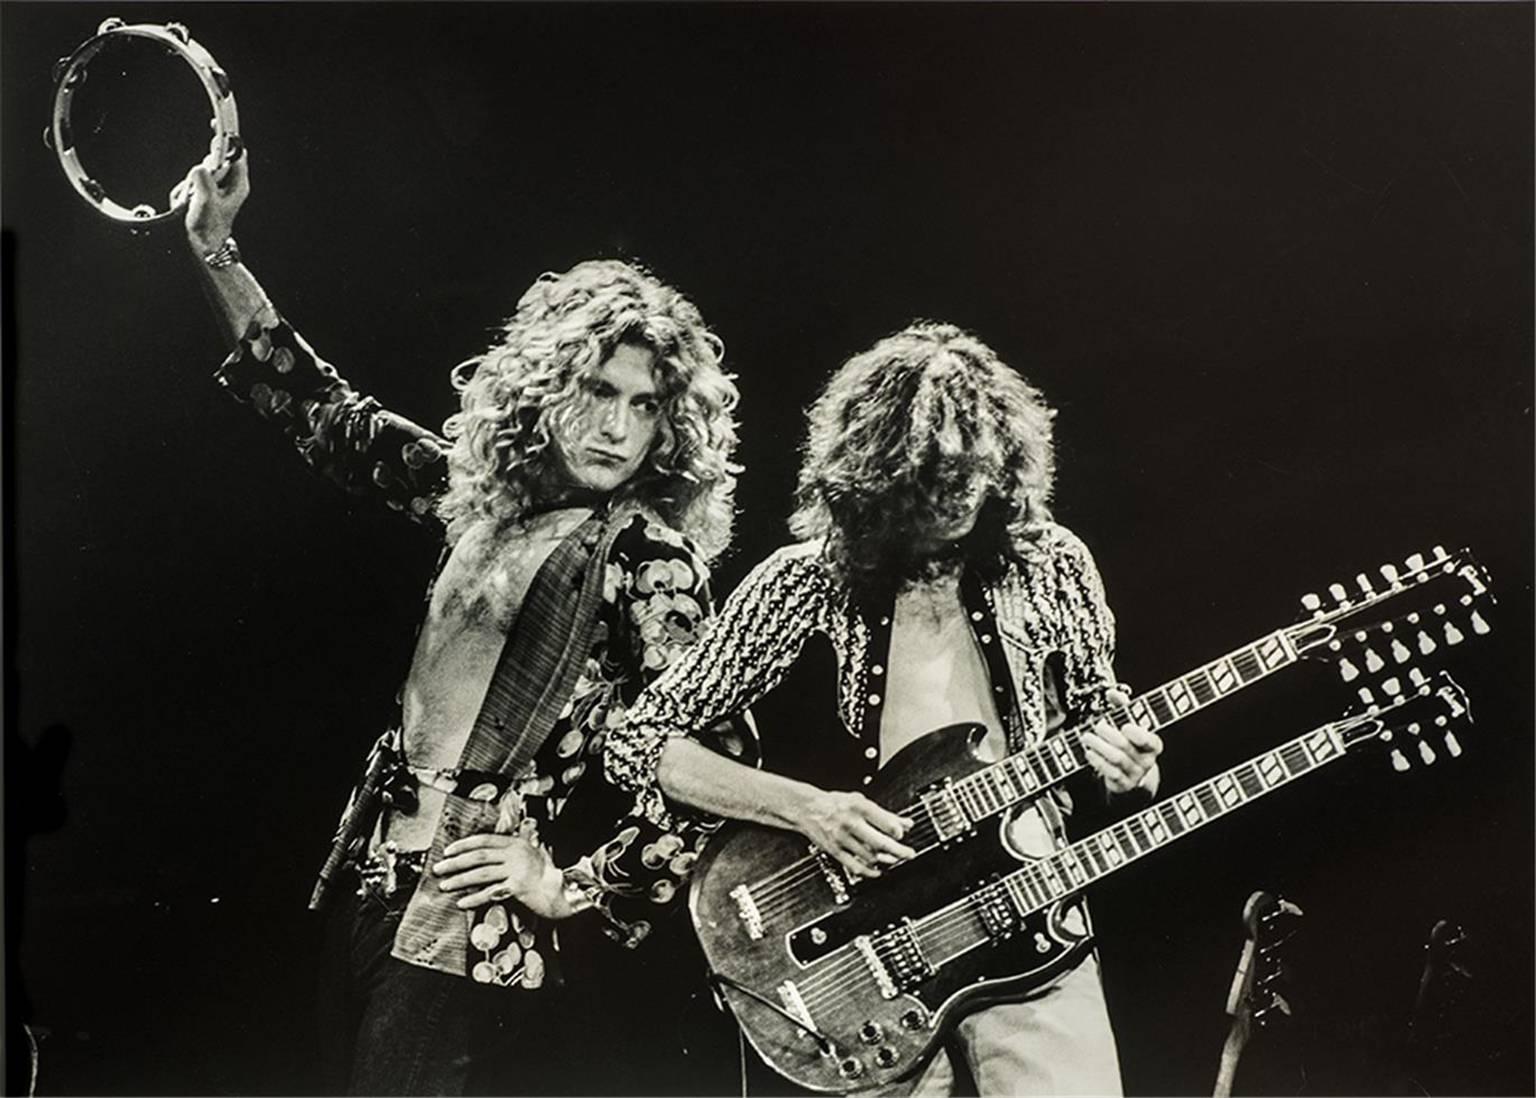 Jay Dickman Black and White Photograph - Robert Plant & Jimmy Page